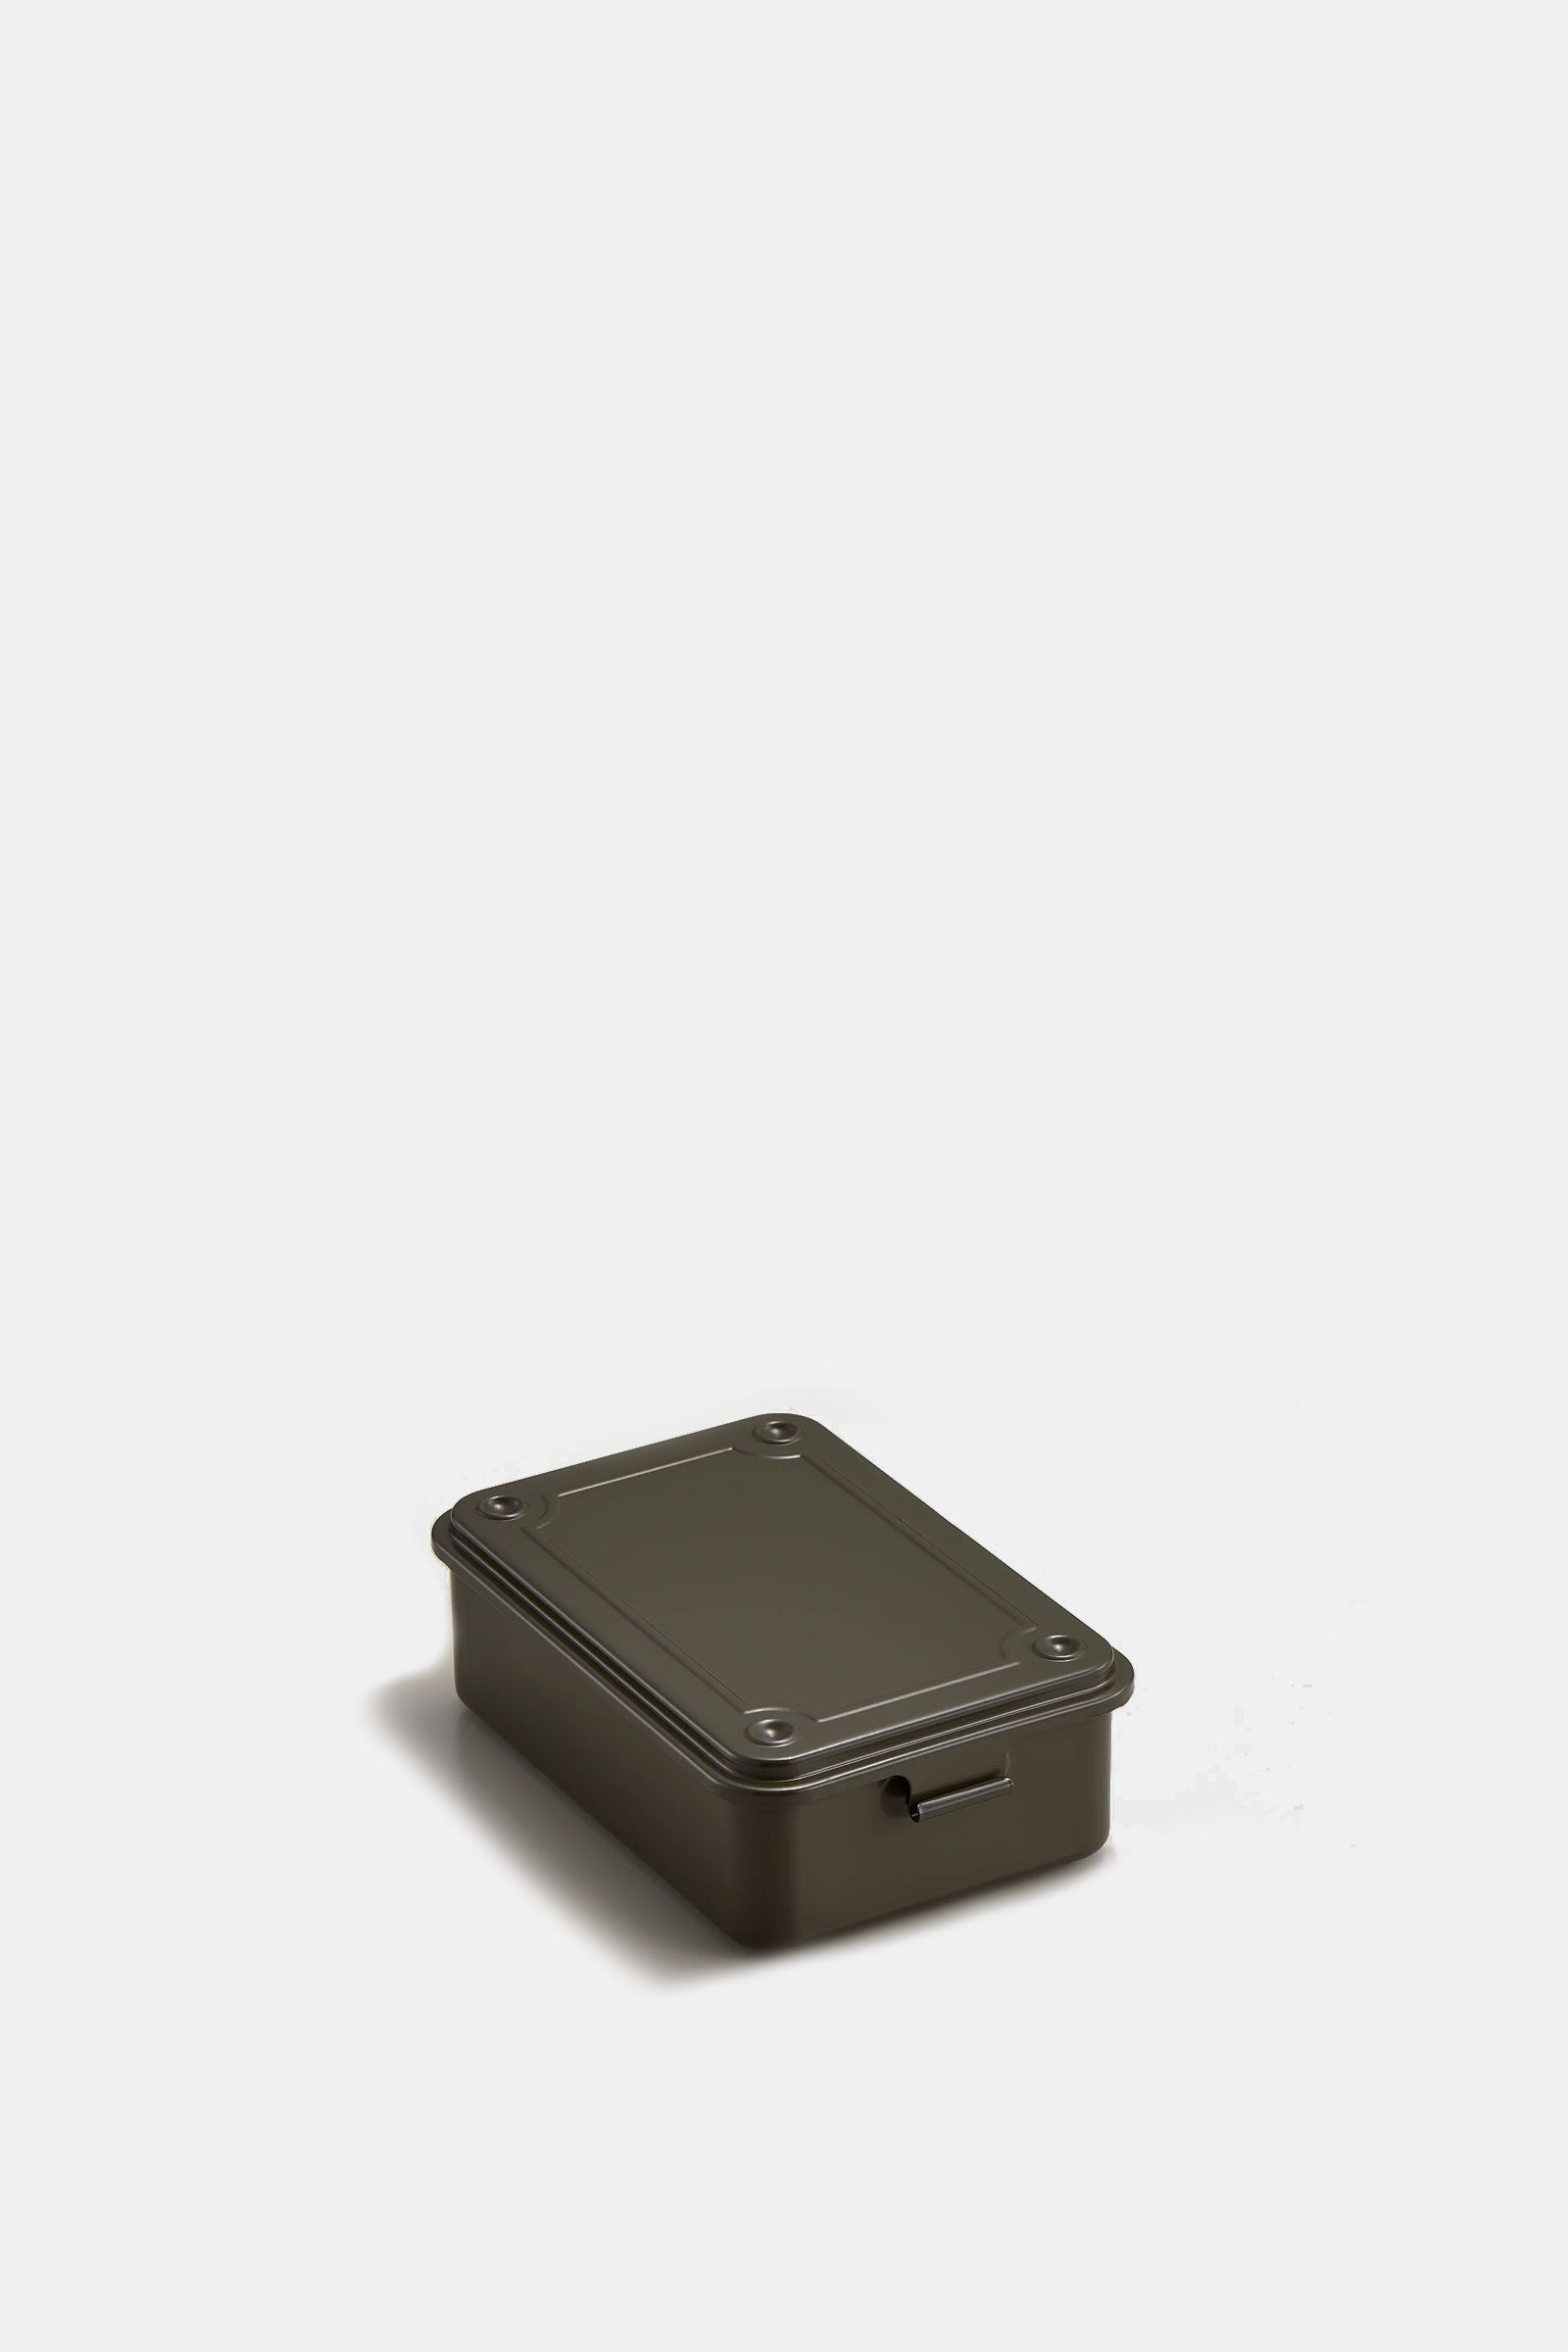 T-150 STACKABLE STORAGE BOX